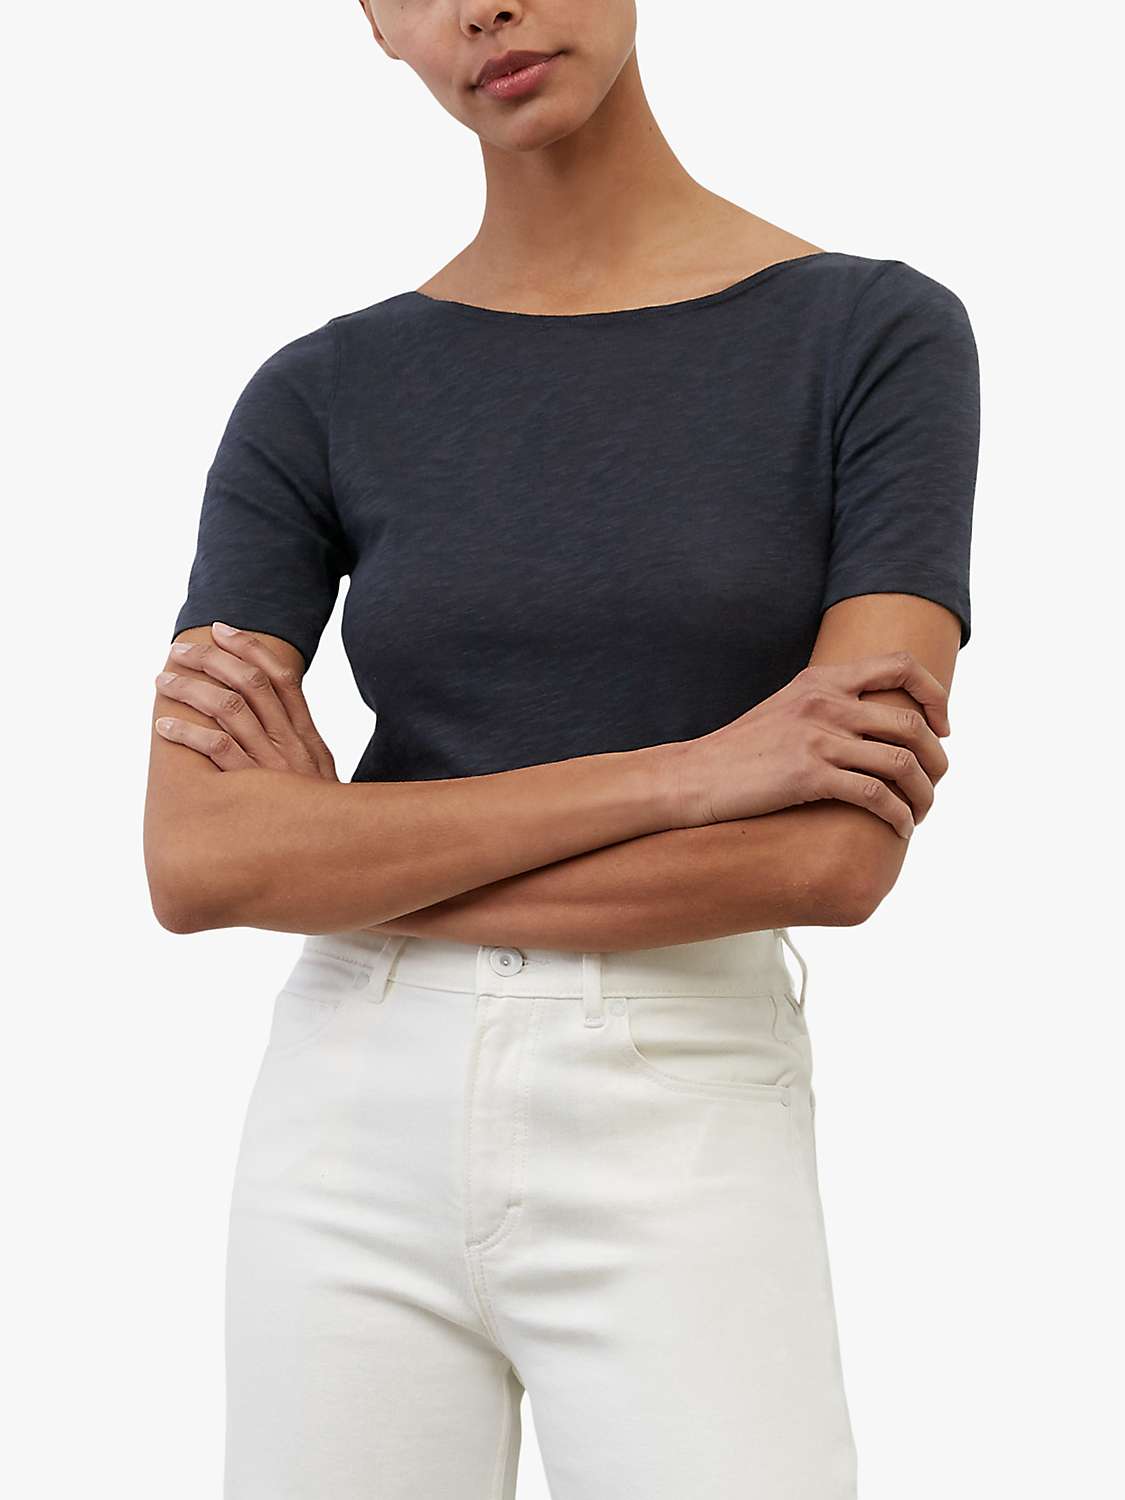 Buy Marc O'Polo Boat Neck Short Sleeve Cotton T-Shirt Online at johnlewis.com